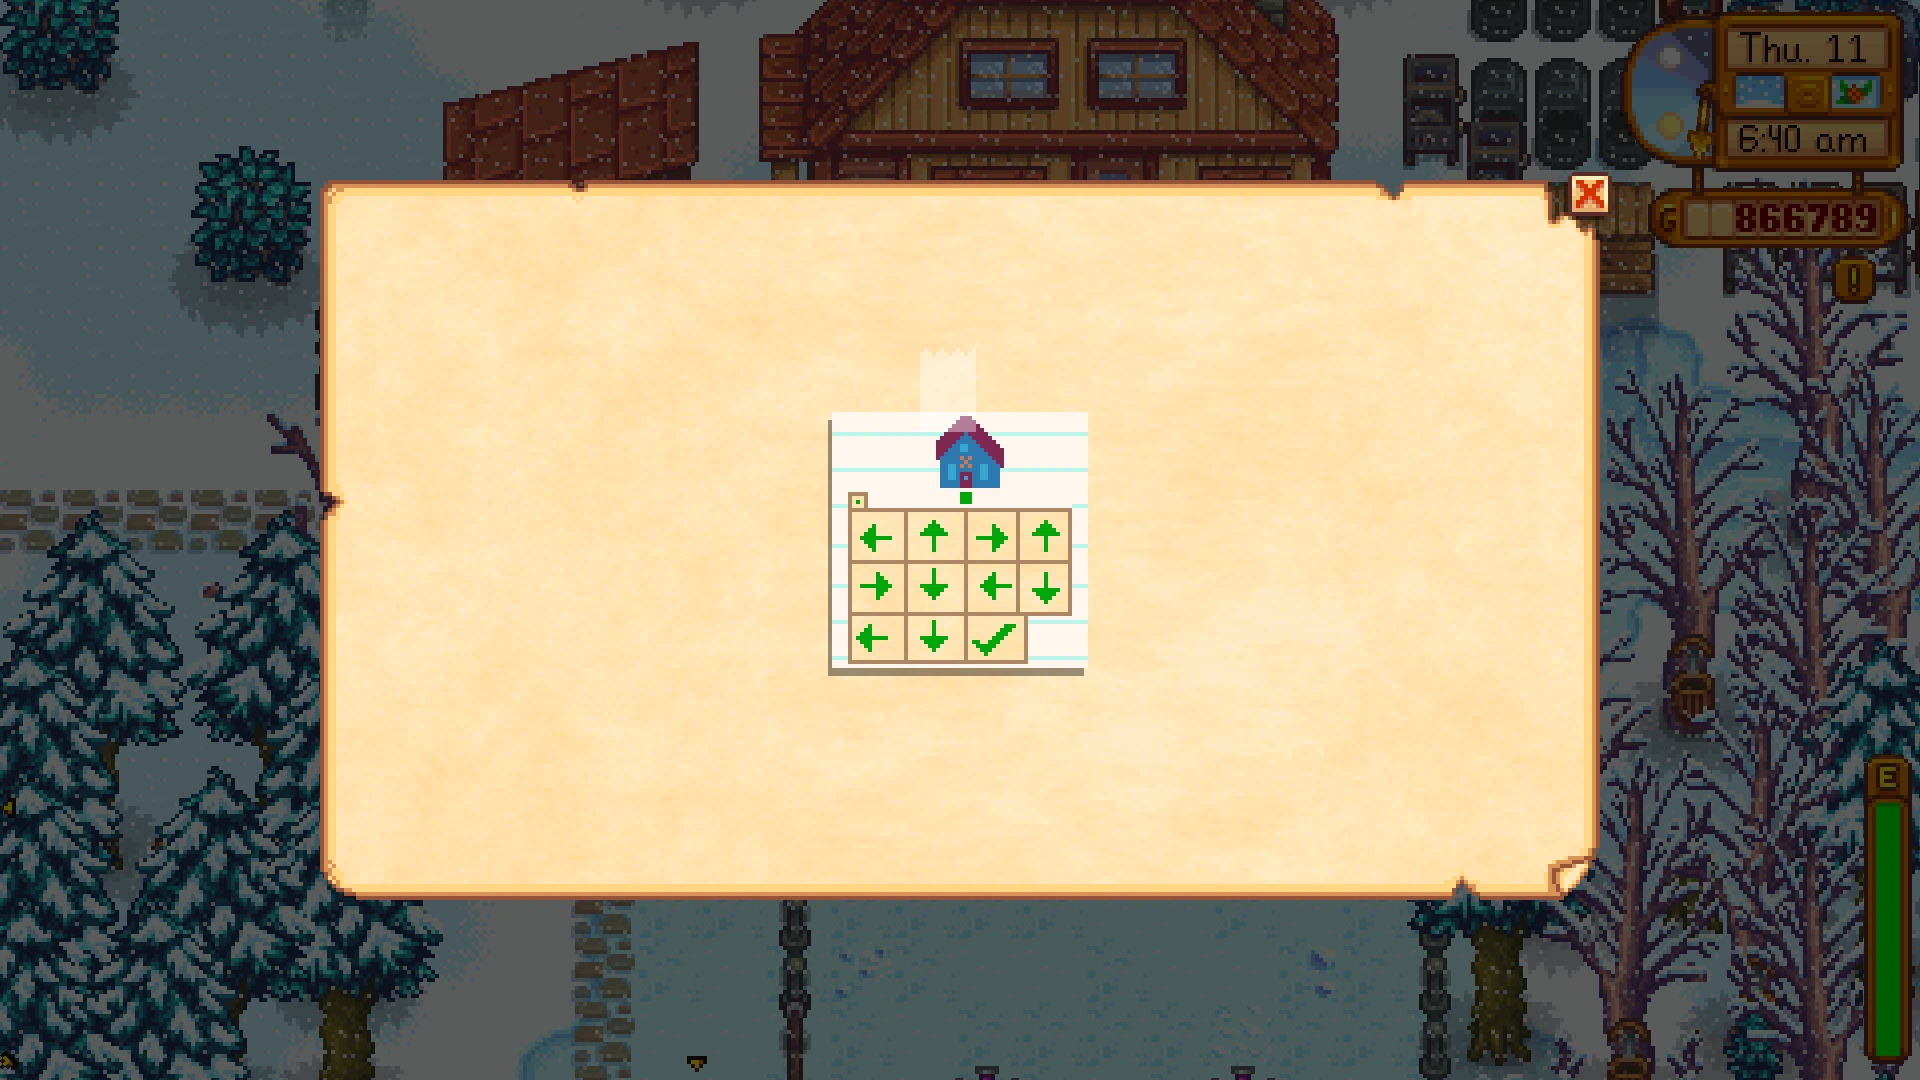 A screenshot showing Secret Note 19 from Stardew Valley.